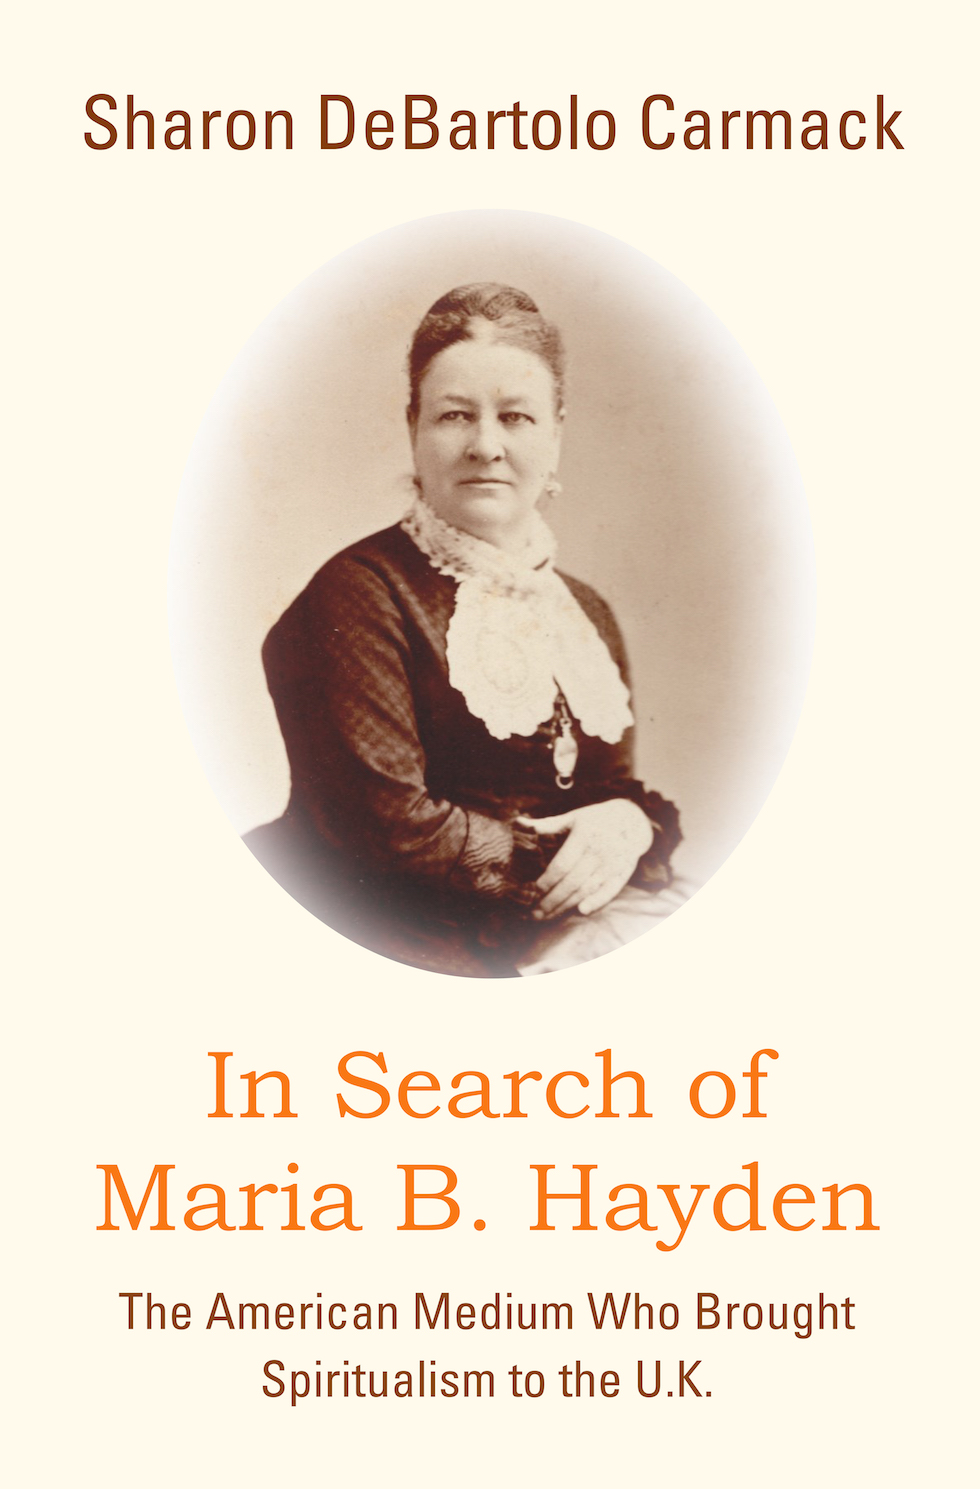 In Search of Maria B. Hayden: The American Medium Who Brought Spiritualism to the U.K.